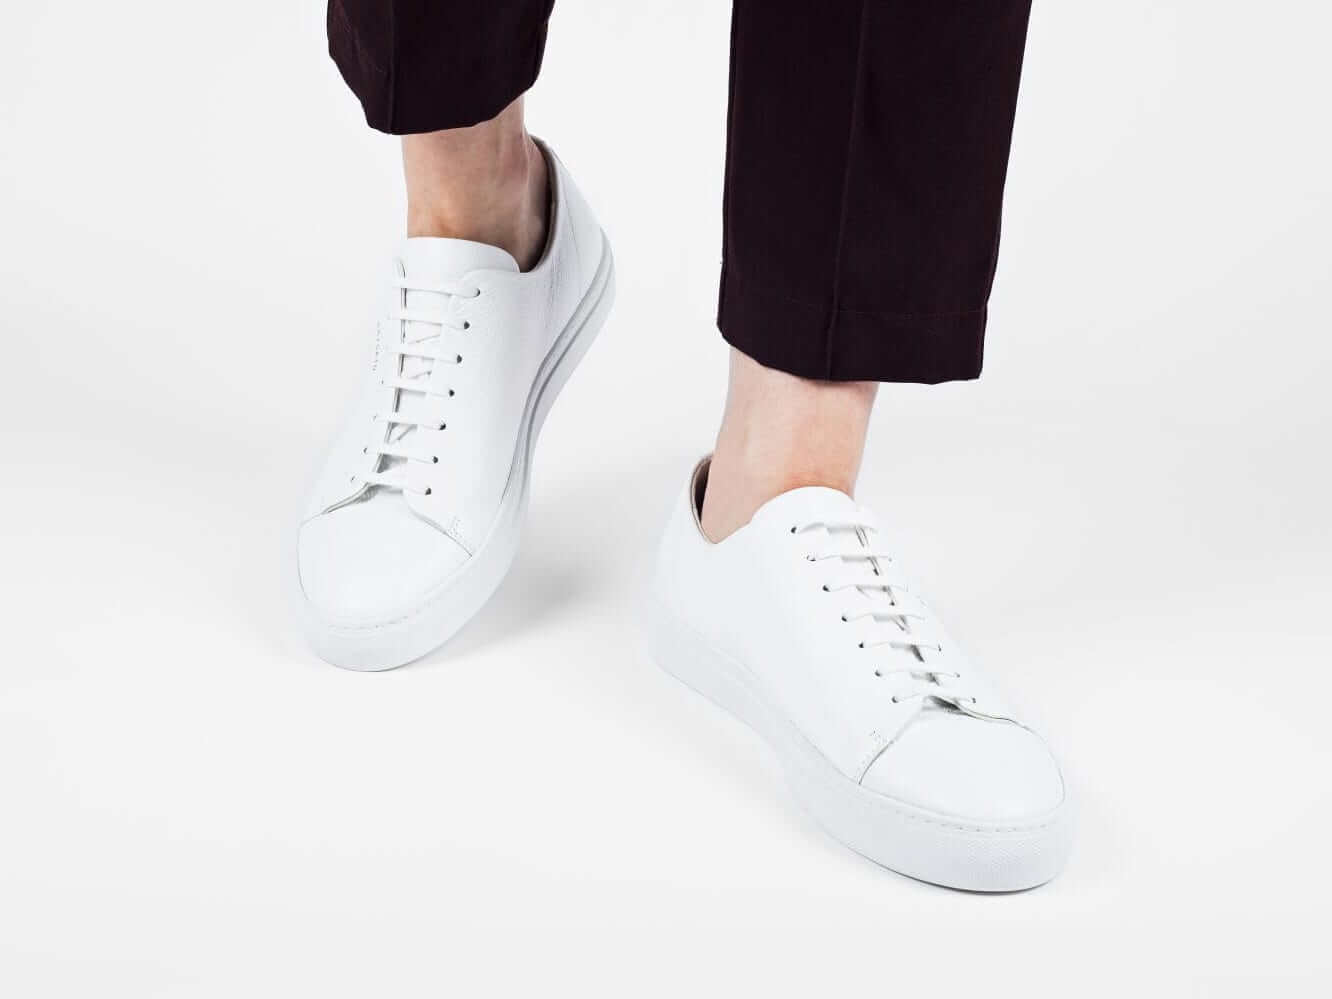 skud Guggenheim Museum acceptere 5 Pairs of Women's White Sneakers that are Not Common Projects — DeFolio